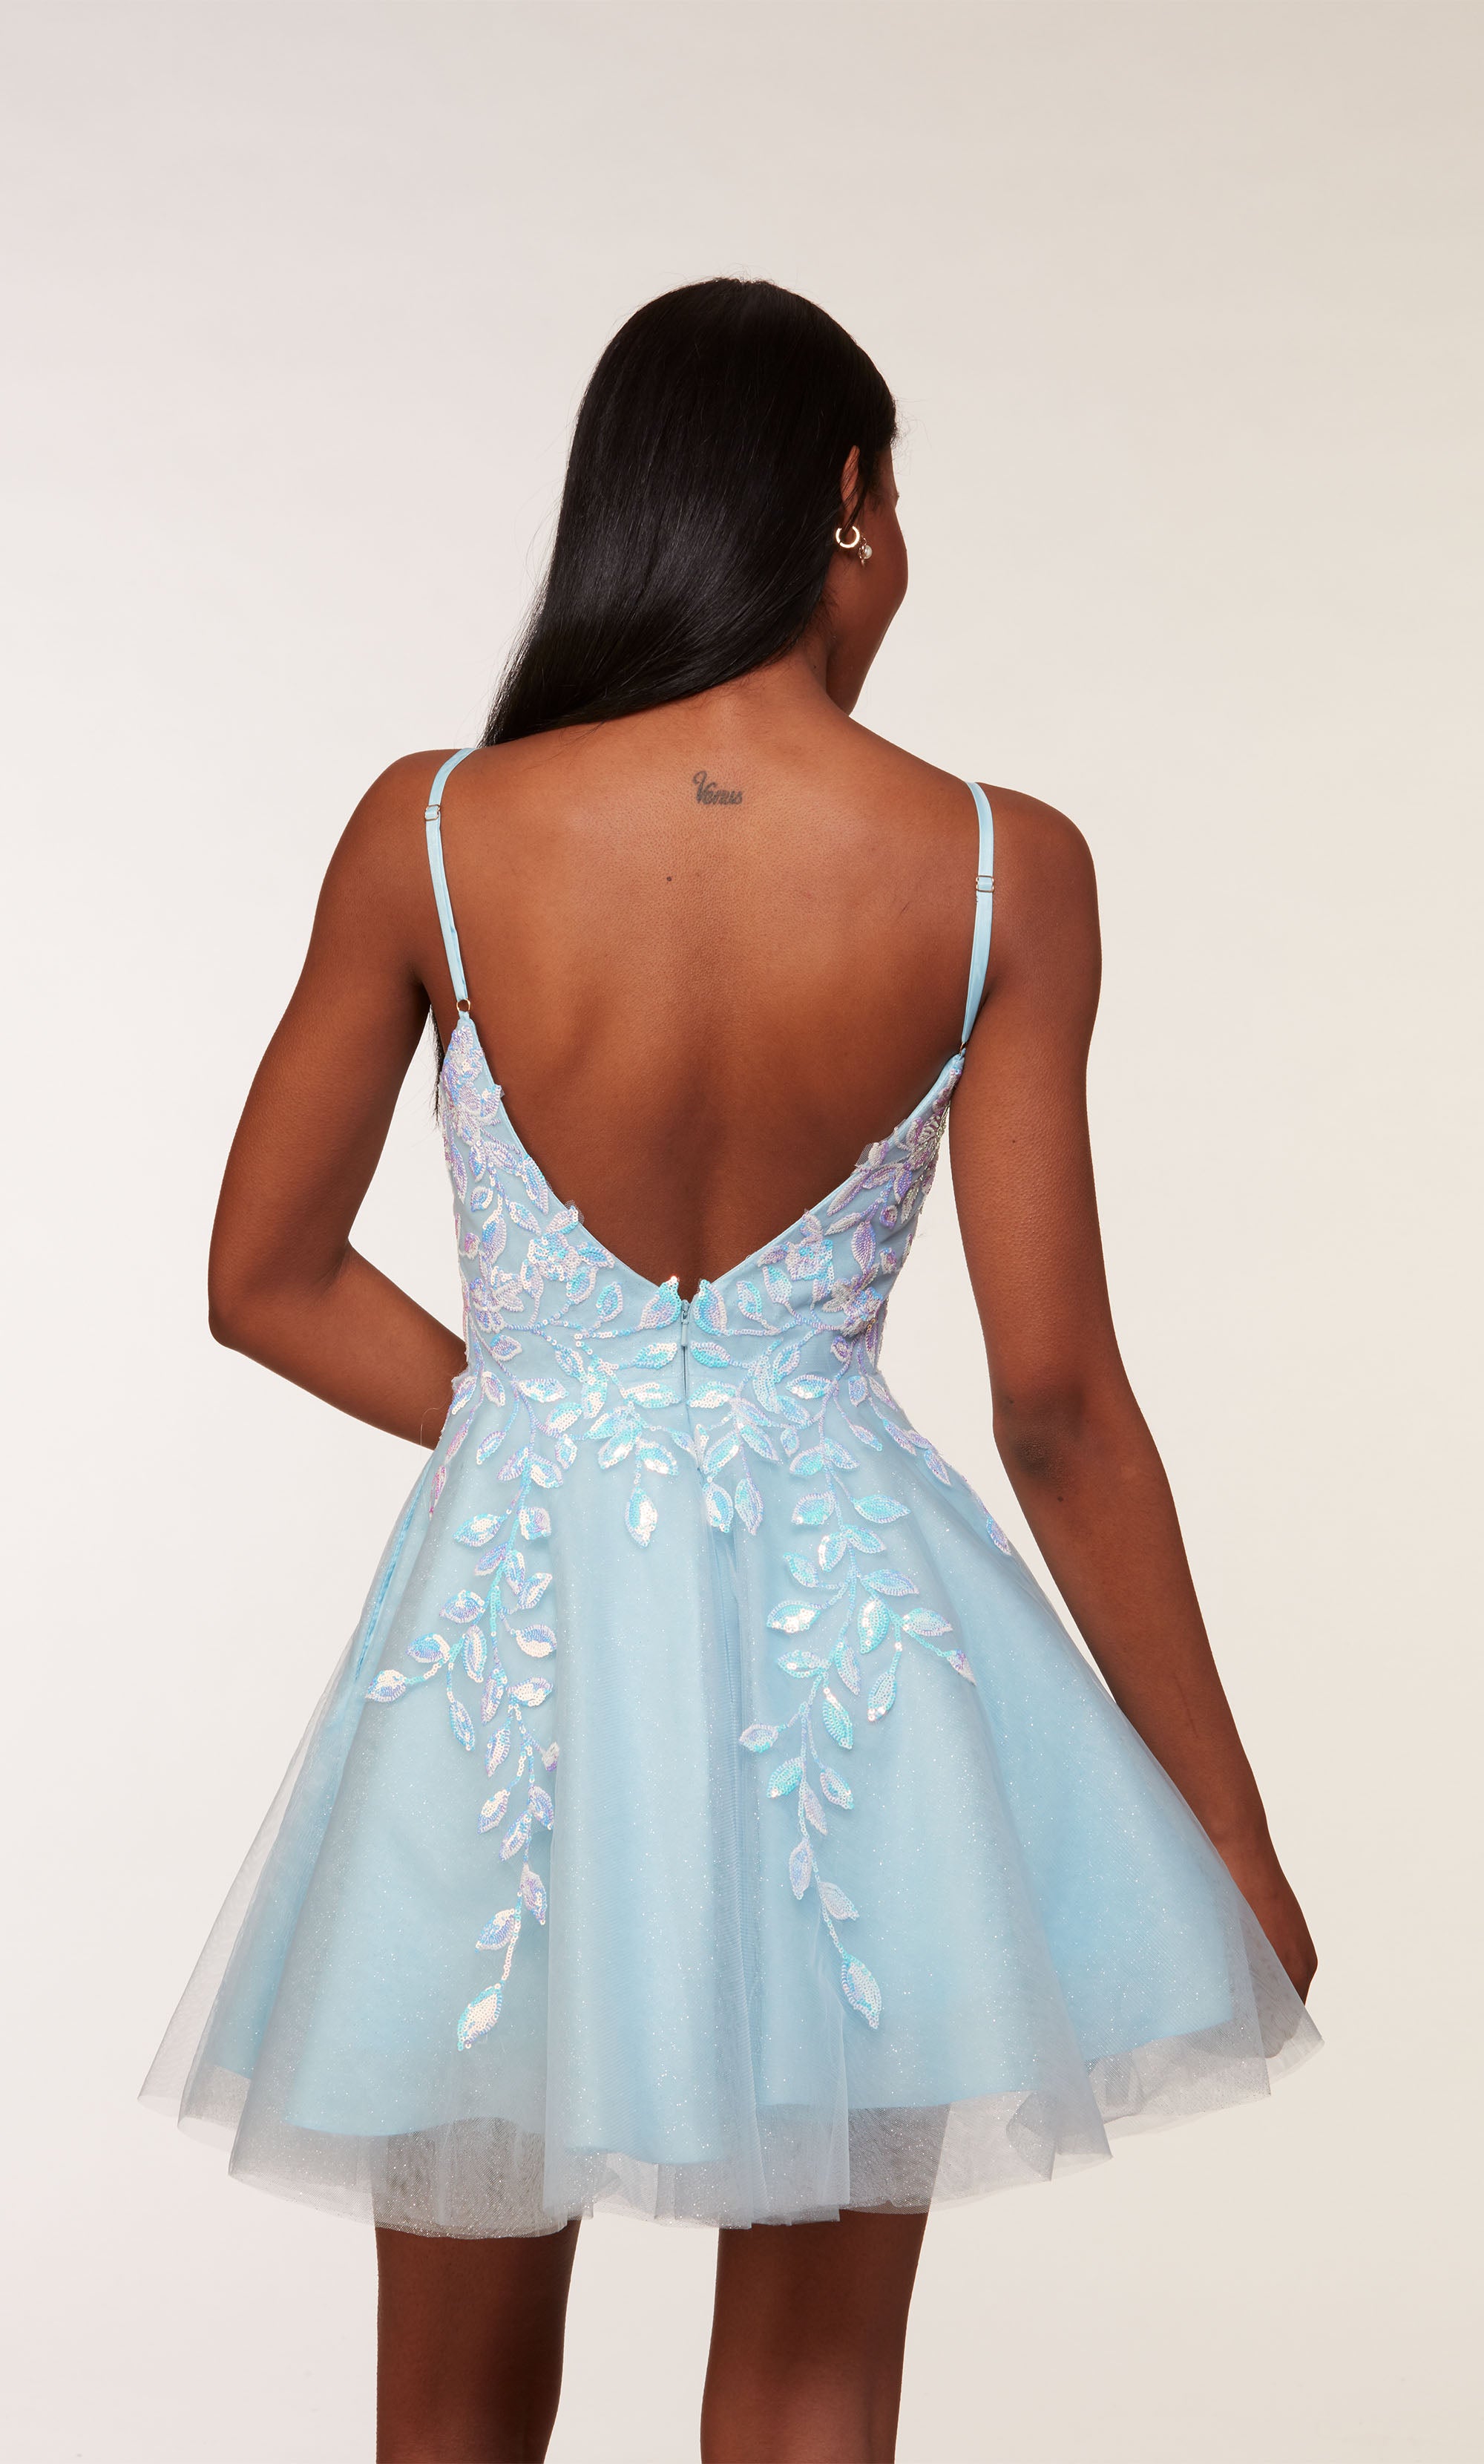 A charming light blue homecoming dress with a V-neckline, delicate spaghetti straps, and a flared skirt, showcasing a soft and feminine aesthetic.